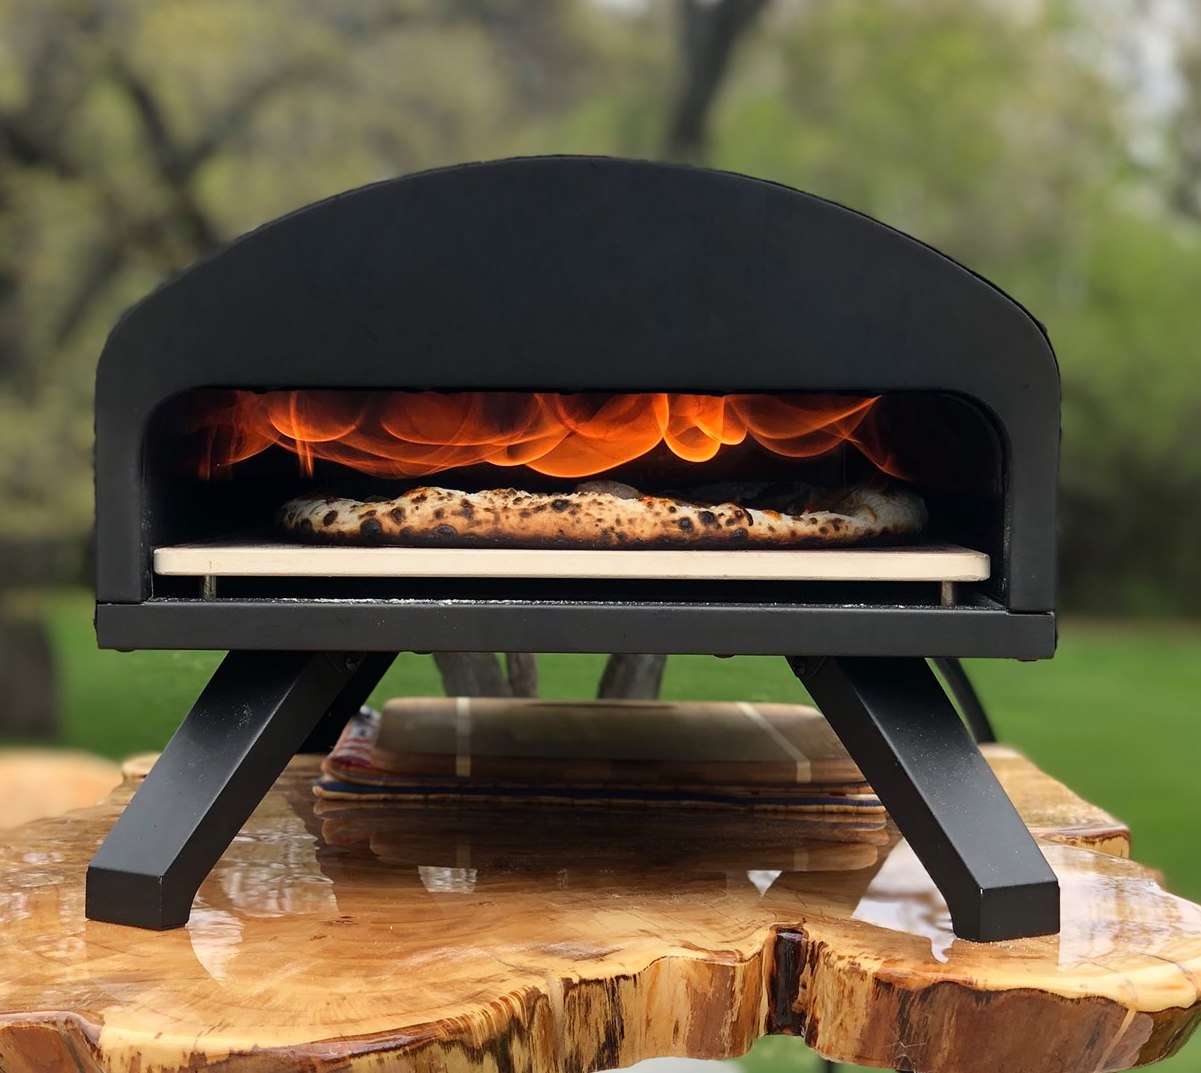 Bertello Outdoor Wood Fired & Gas Pizza Oven  Bertello Outdoor Pizza Oven  – Bertello Wood Fire & Gas Outdoor Pizza Oven